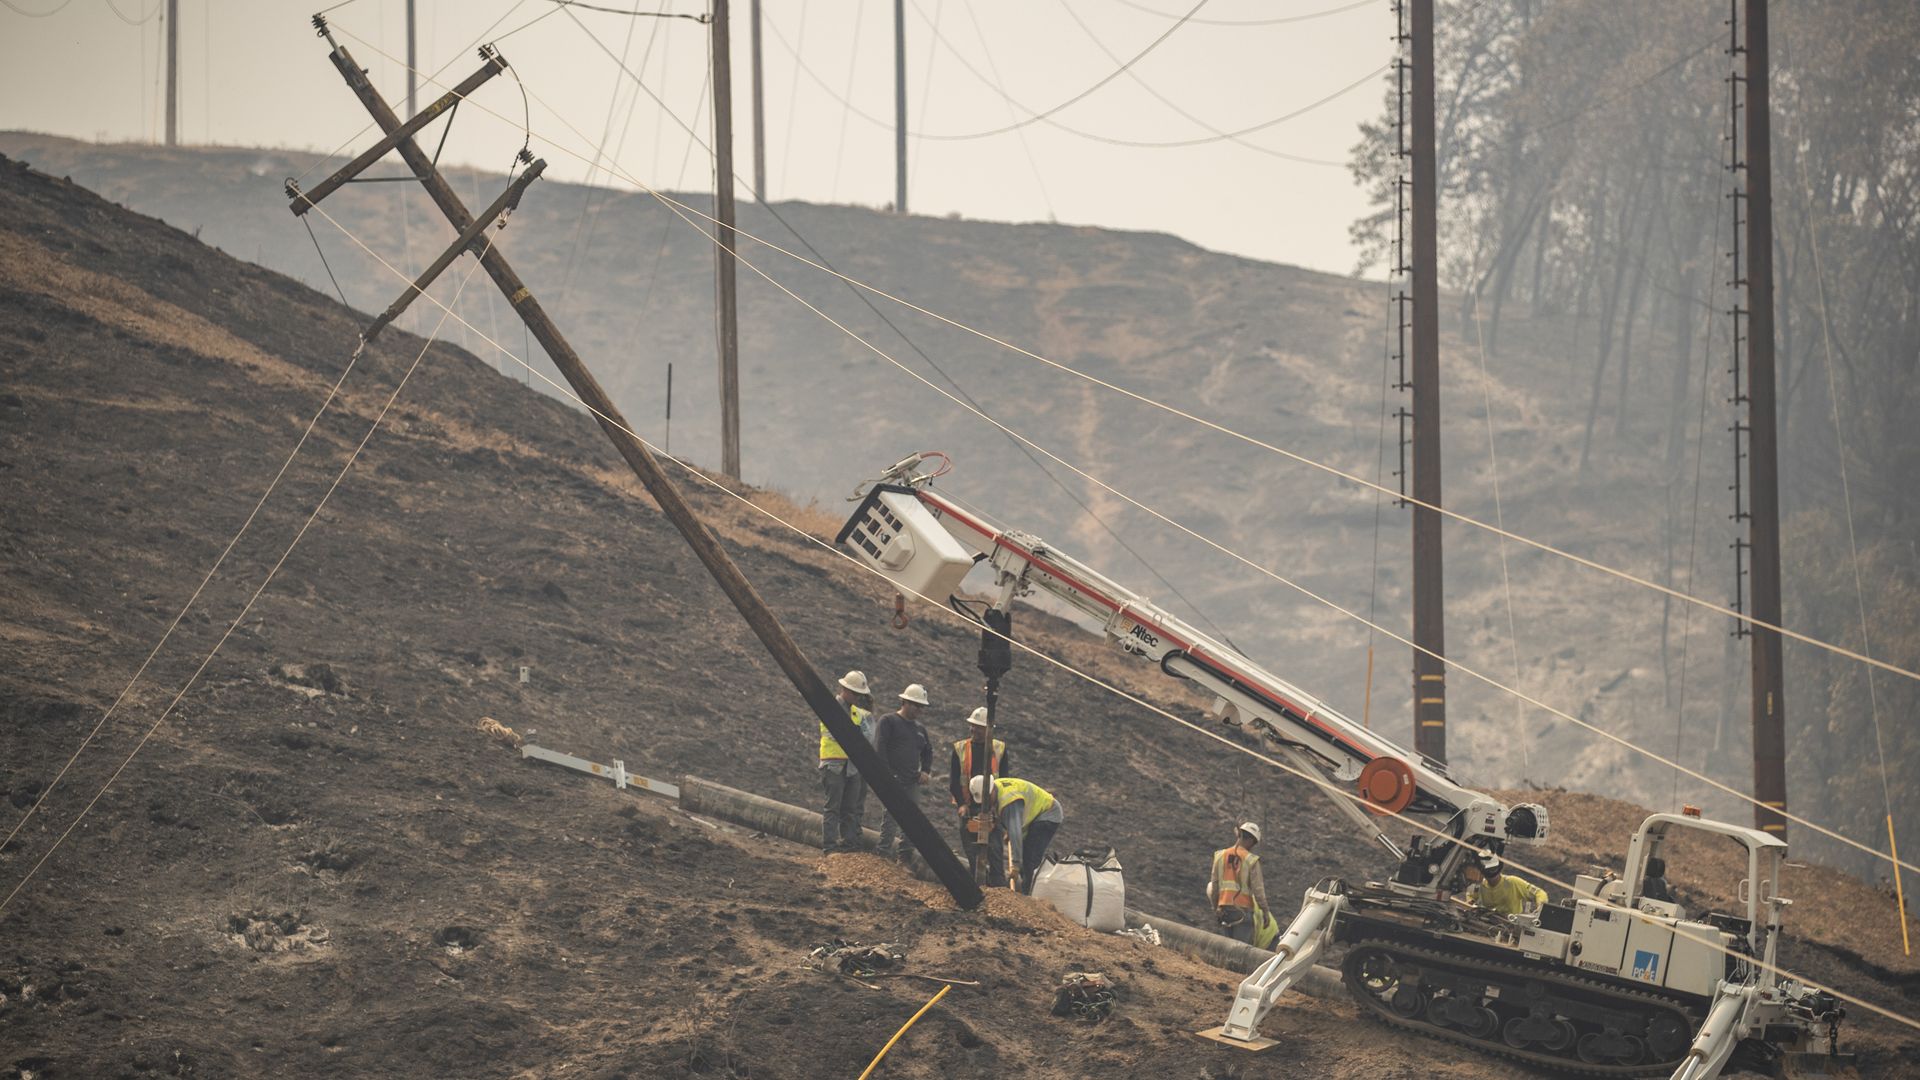 Utility workers with Pacific Gas & Electric Company repair a damaged power line near Lakehead, California, on July 2.